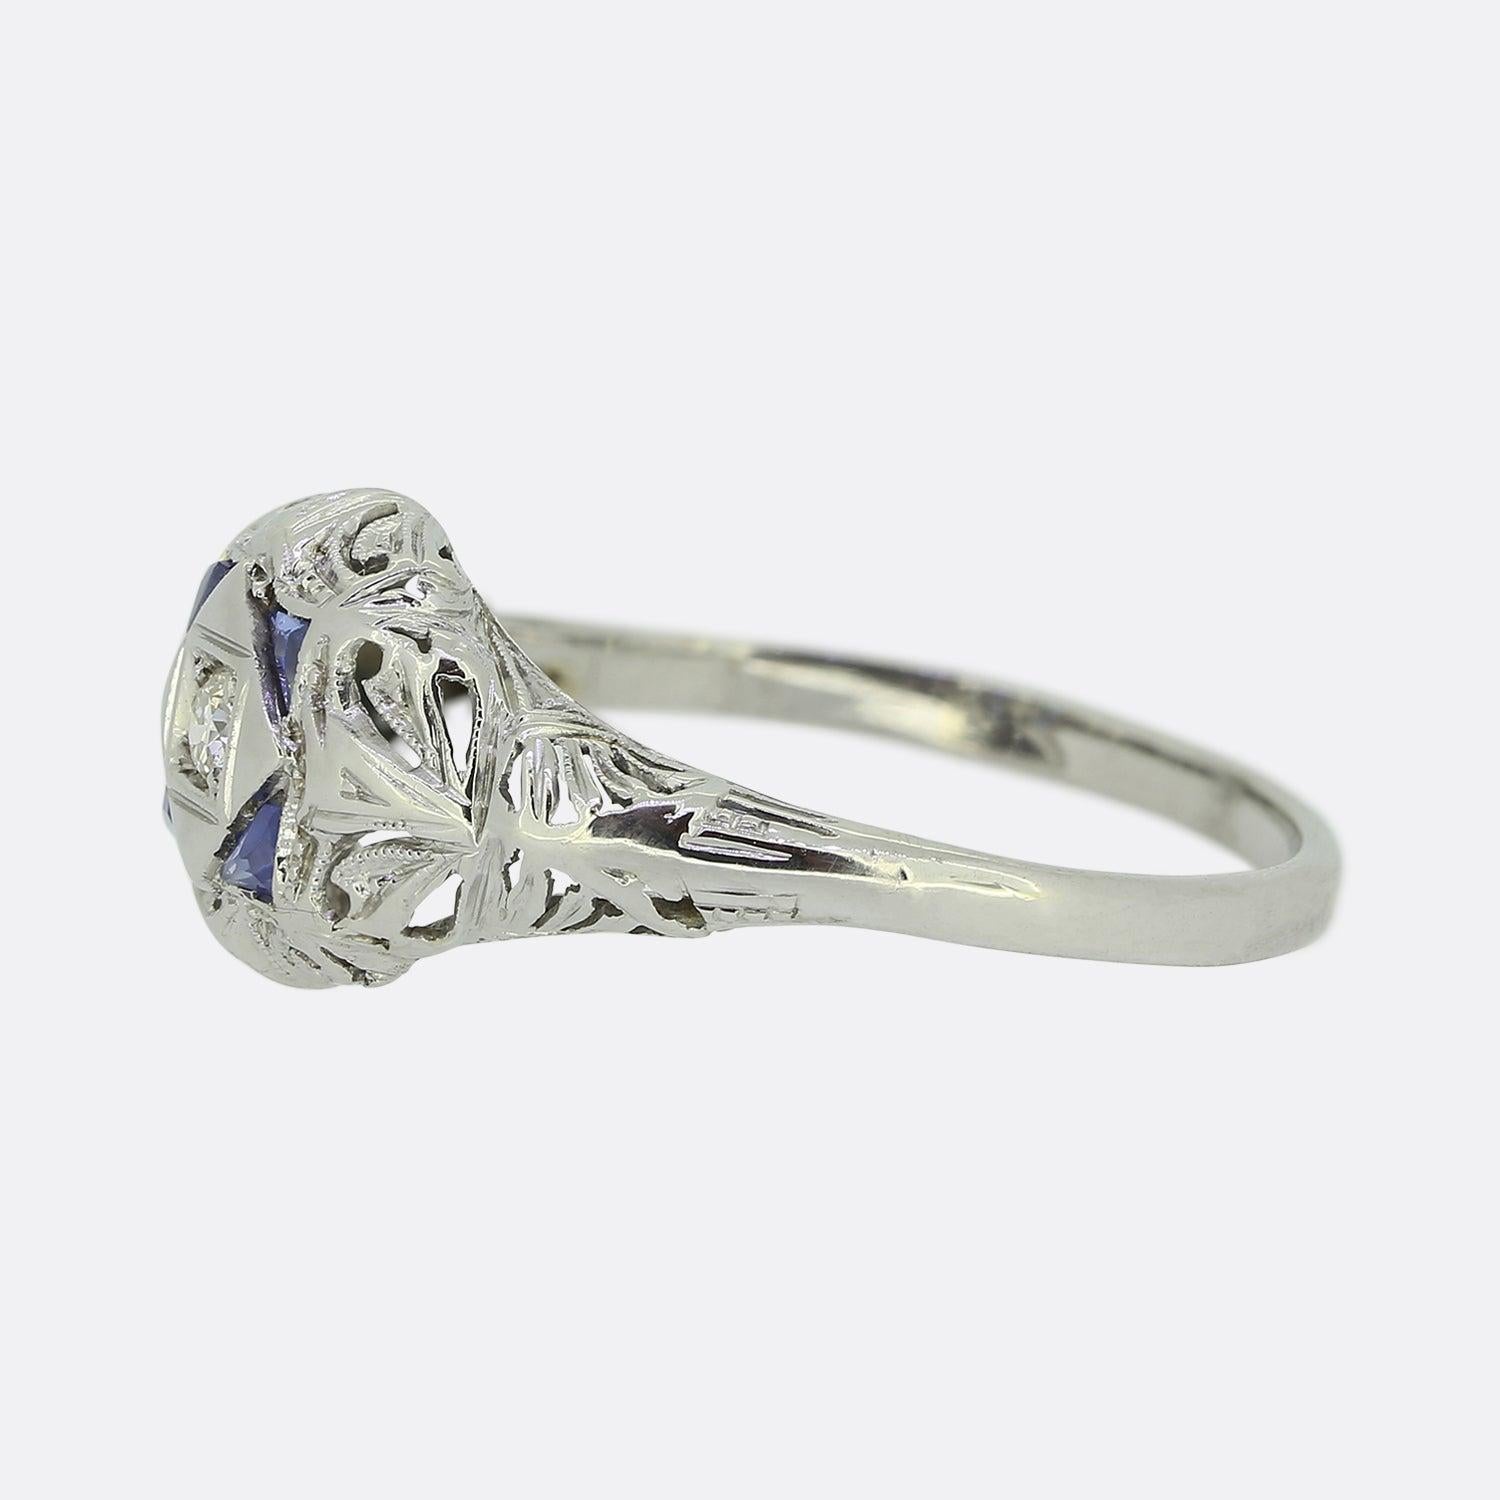 This is a delightful Art Deco sapphire and diamond ring. Crafted from 18ct white gold, this piece showcases many of the typical features associated with the style including meticulously handcrafted open pierced work and the sleek geometric designs.